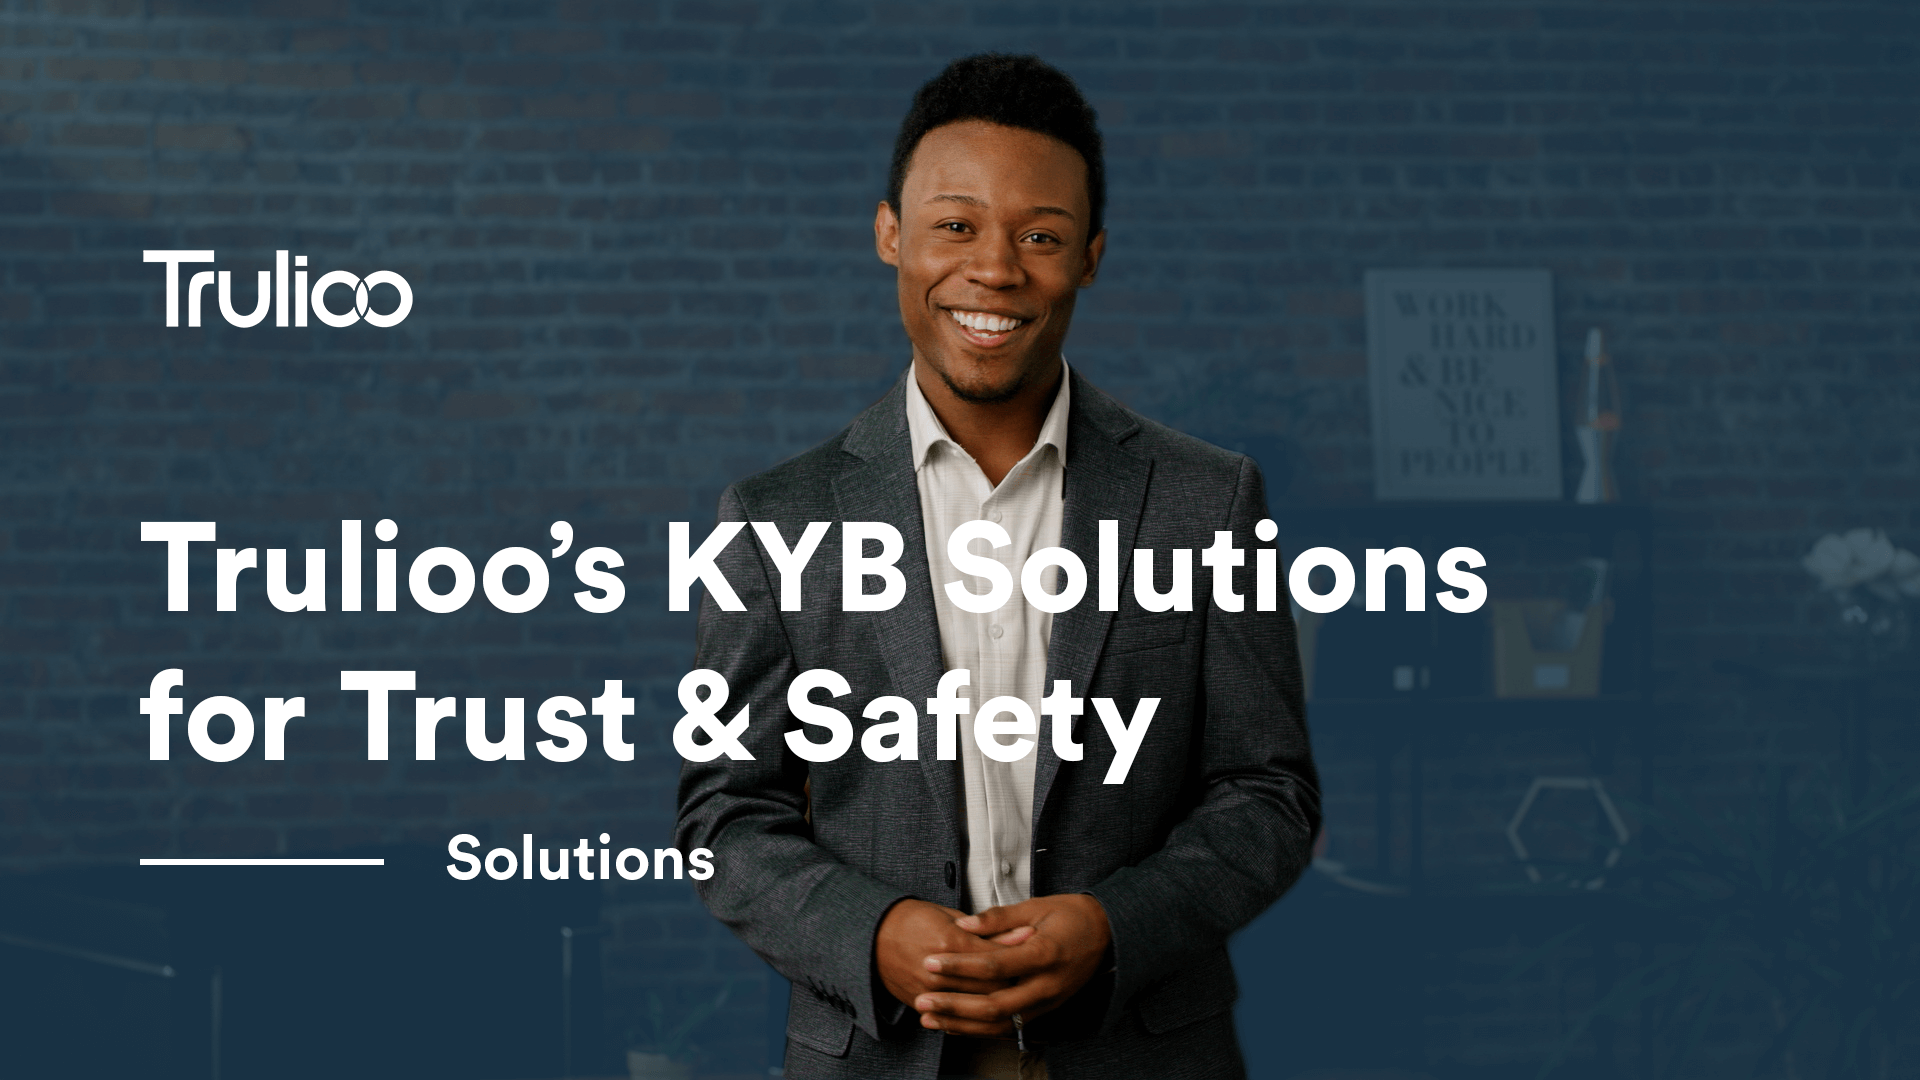 Trulioo’s KYB Solutions for Trust & Safety